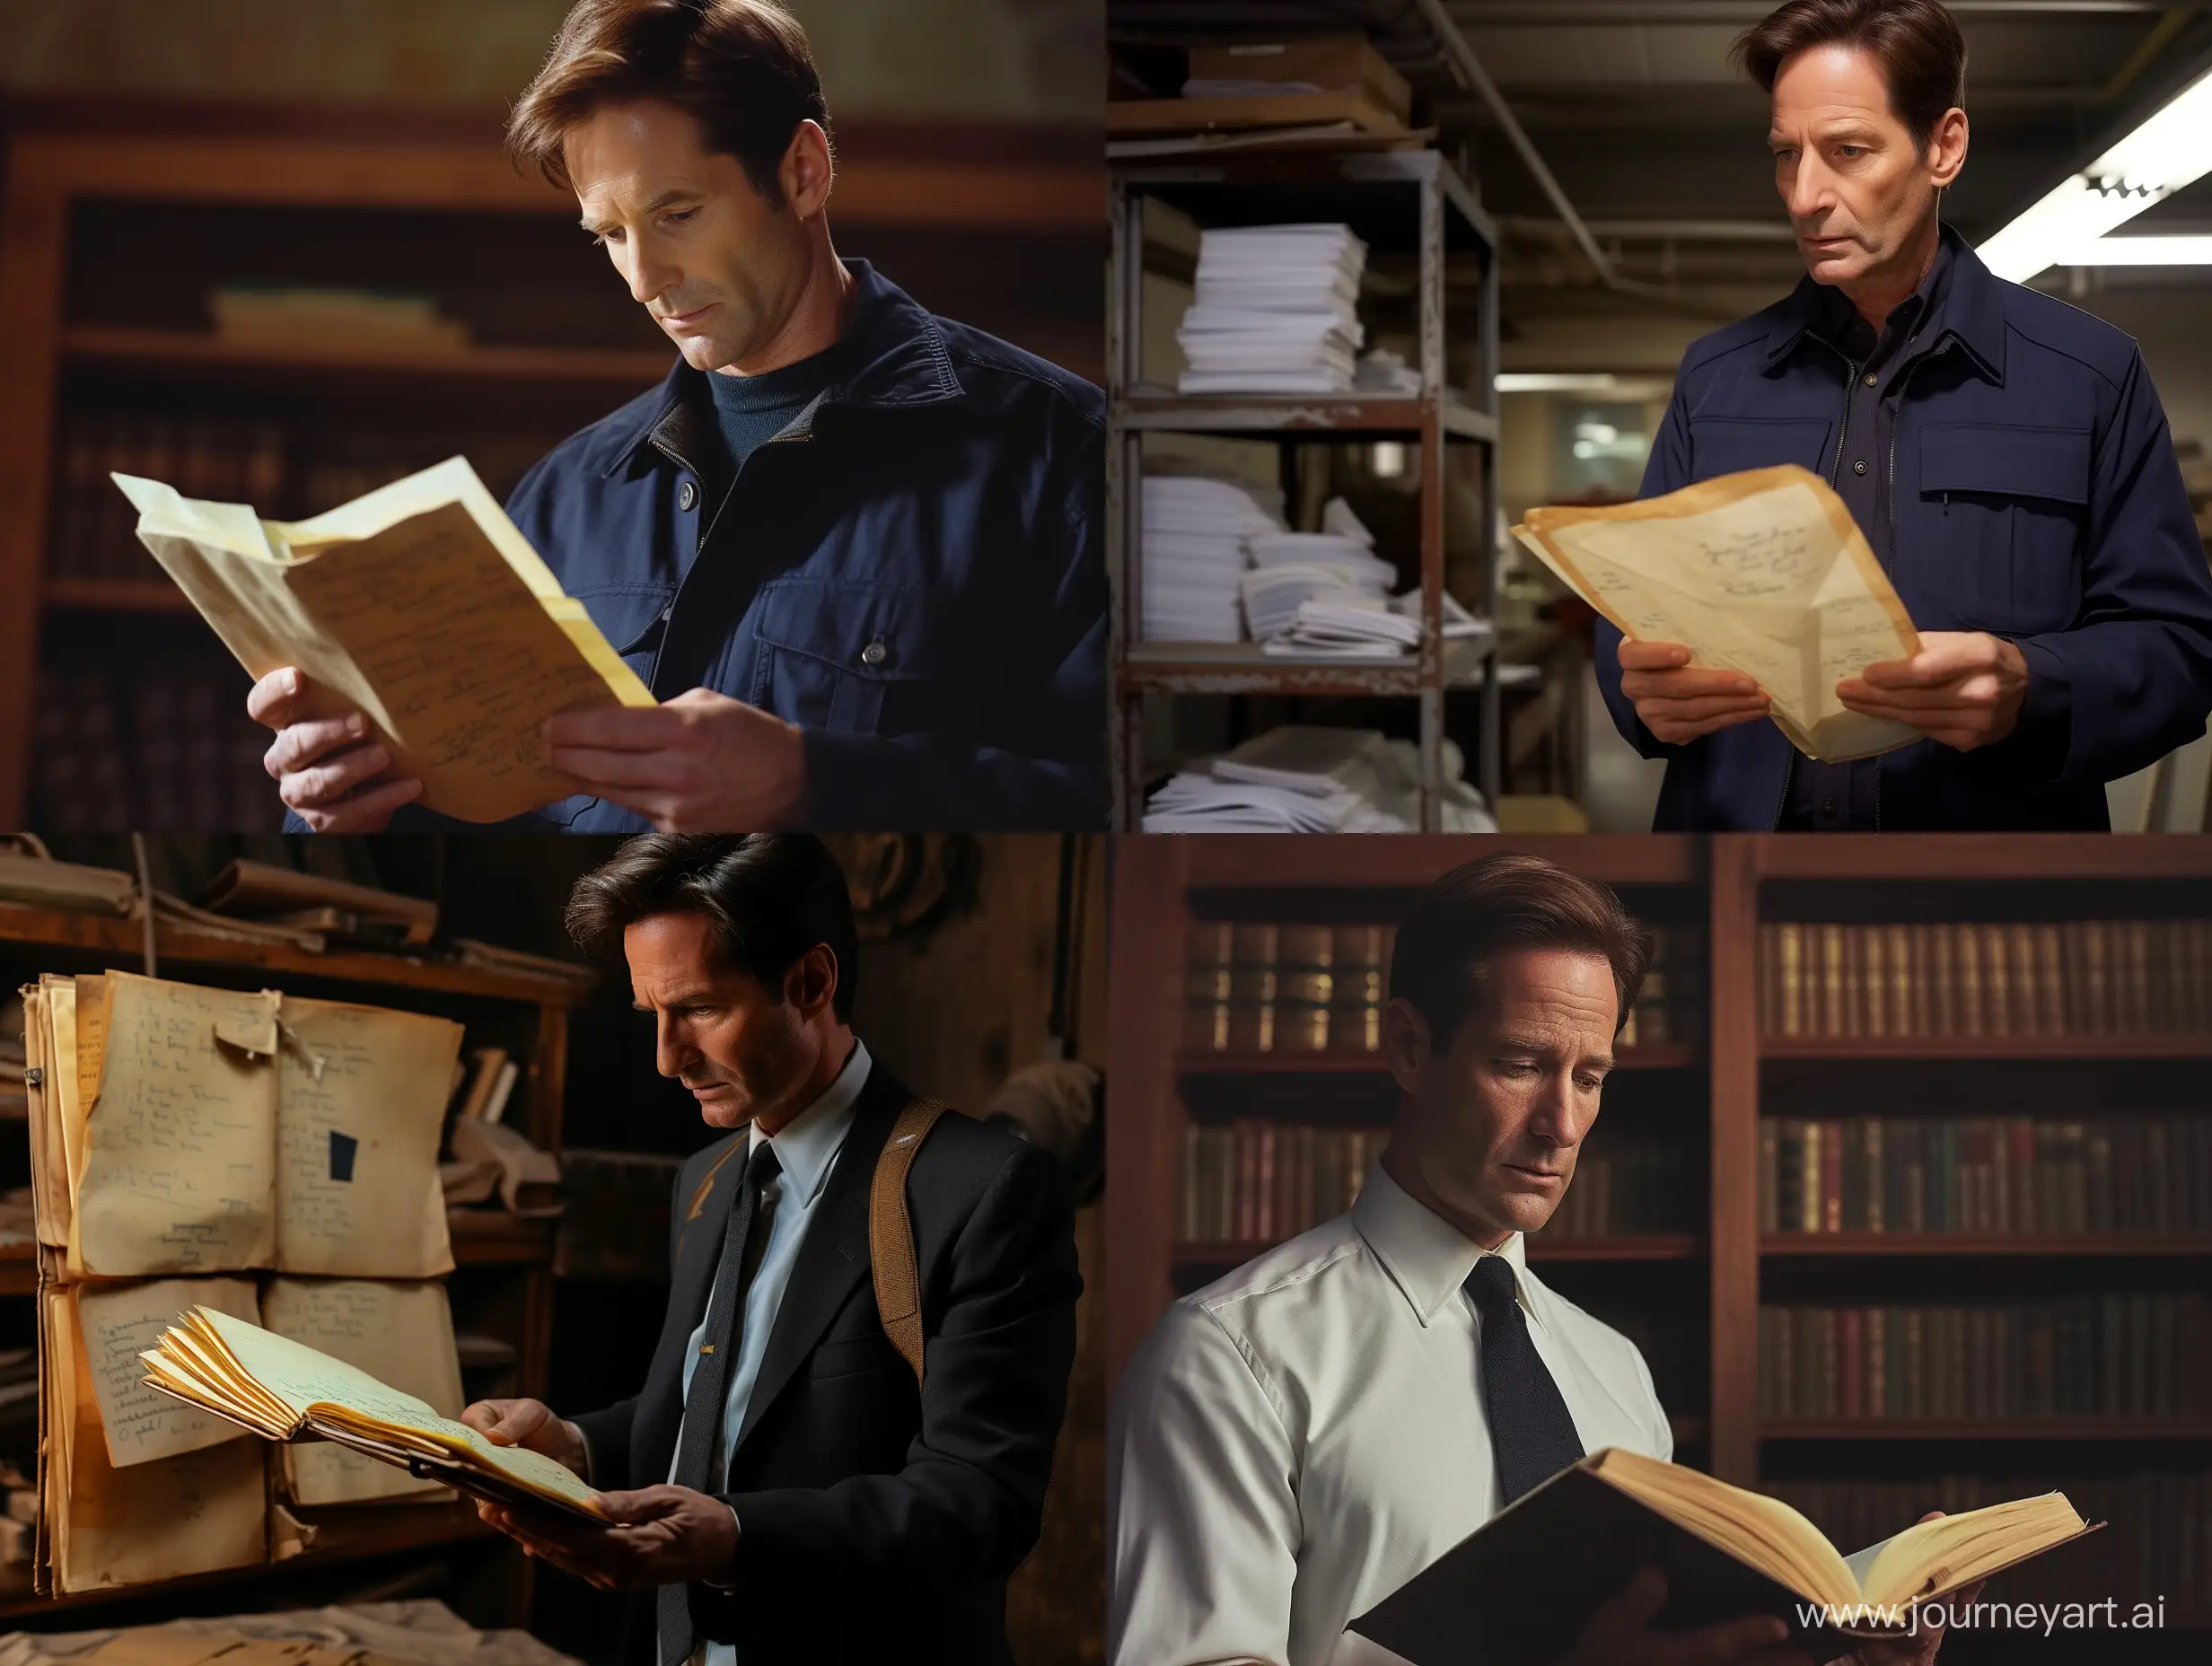 Agent-Fox-Mulder-Investigating-with-Notebook-in-43-Aspect-Ratio